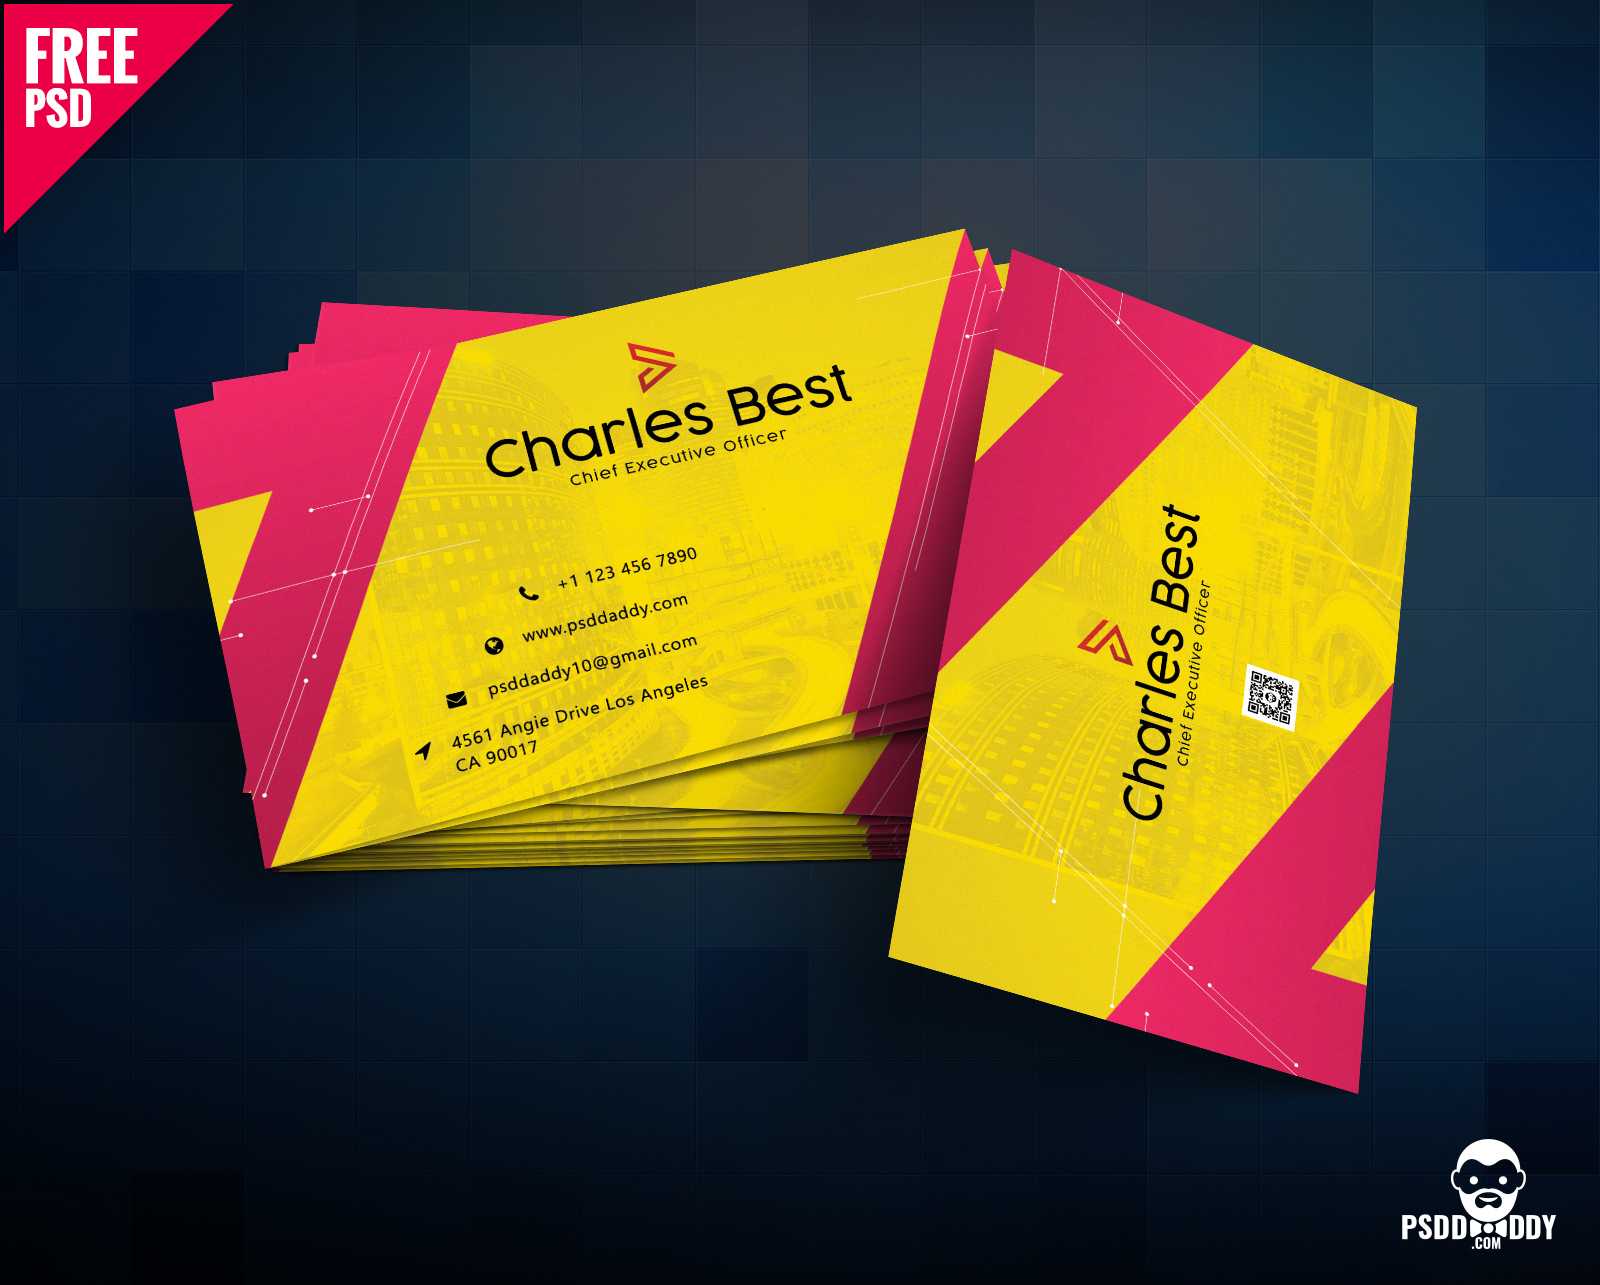 Download] Creative Business Card Free Psd | Psddaddy Within Visiting Card Template Psd Free Download